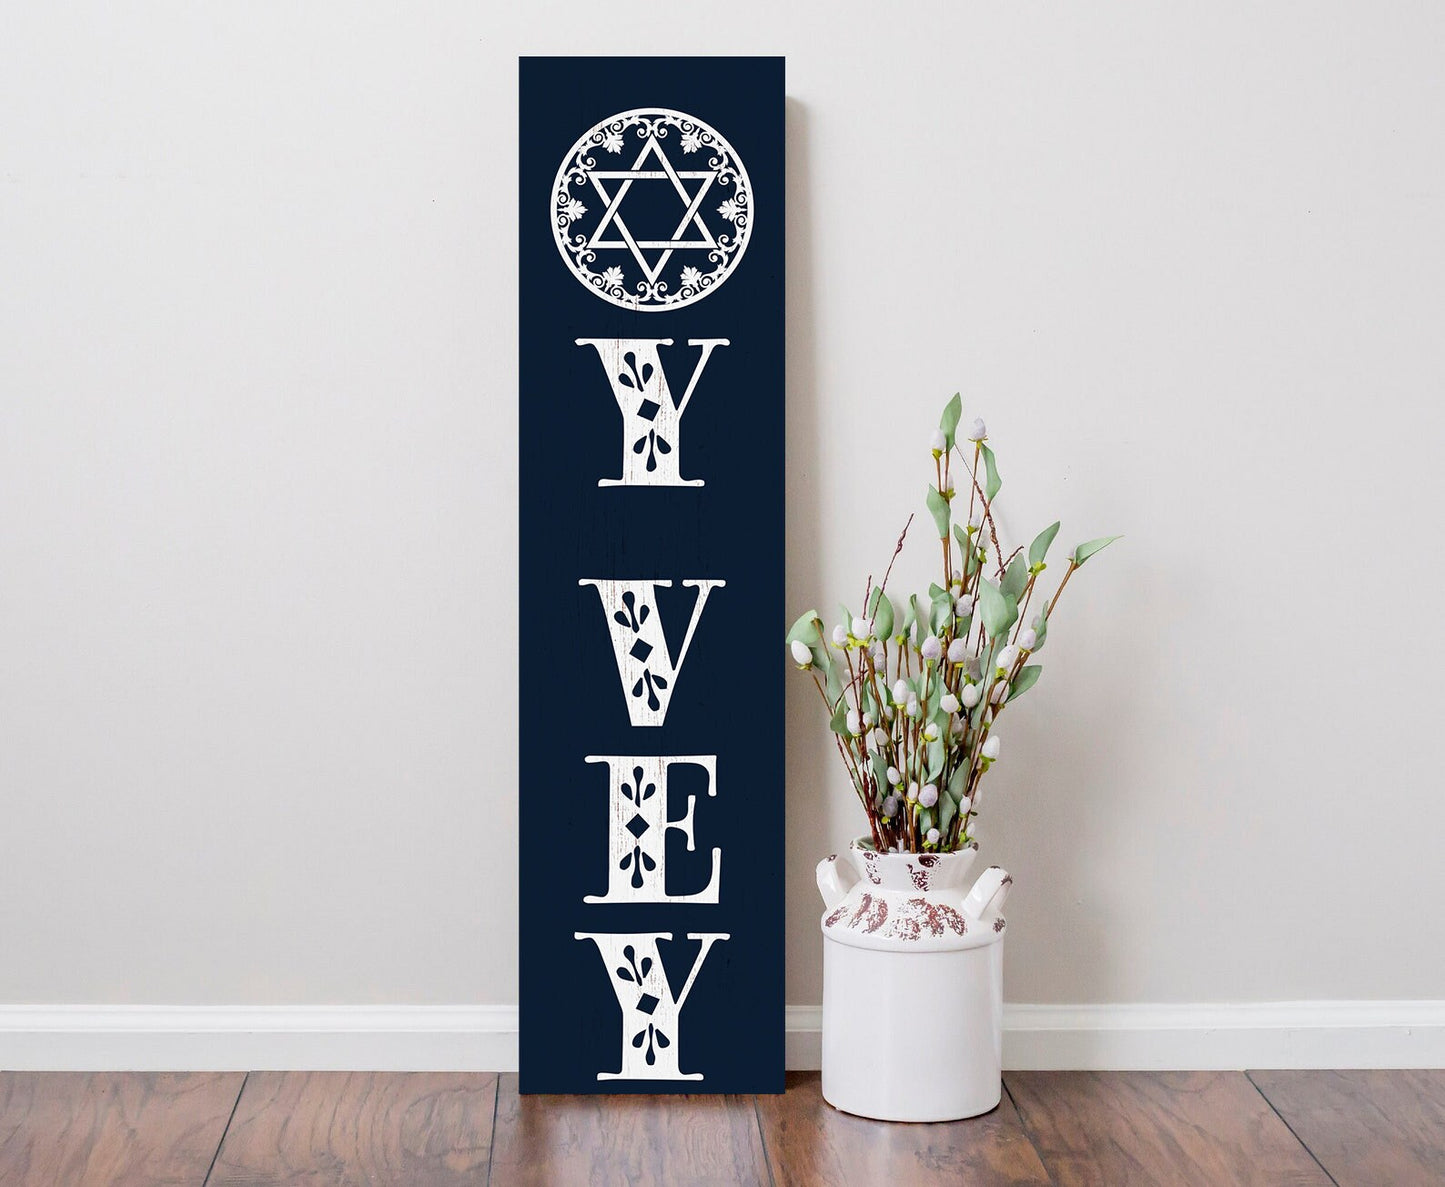 36in "Oy Vey" Porch Sign - Front Door Decor, Entryway Board Wall Decor for a Humorous Home Touch Fun Door Sign